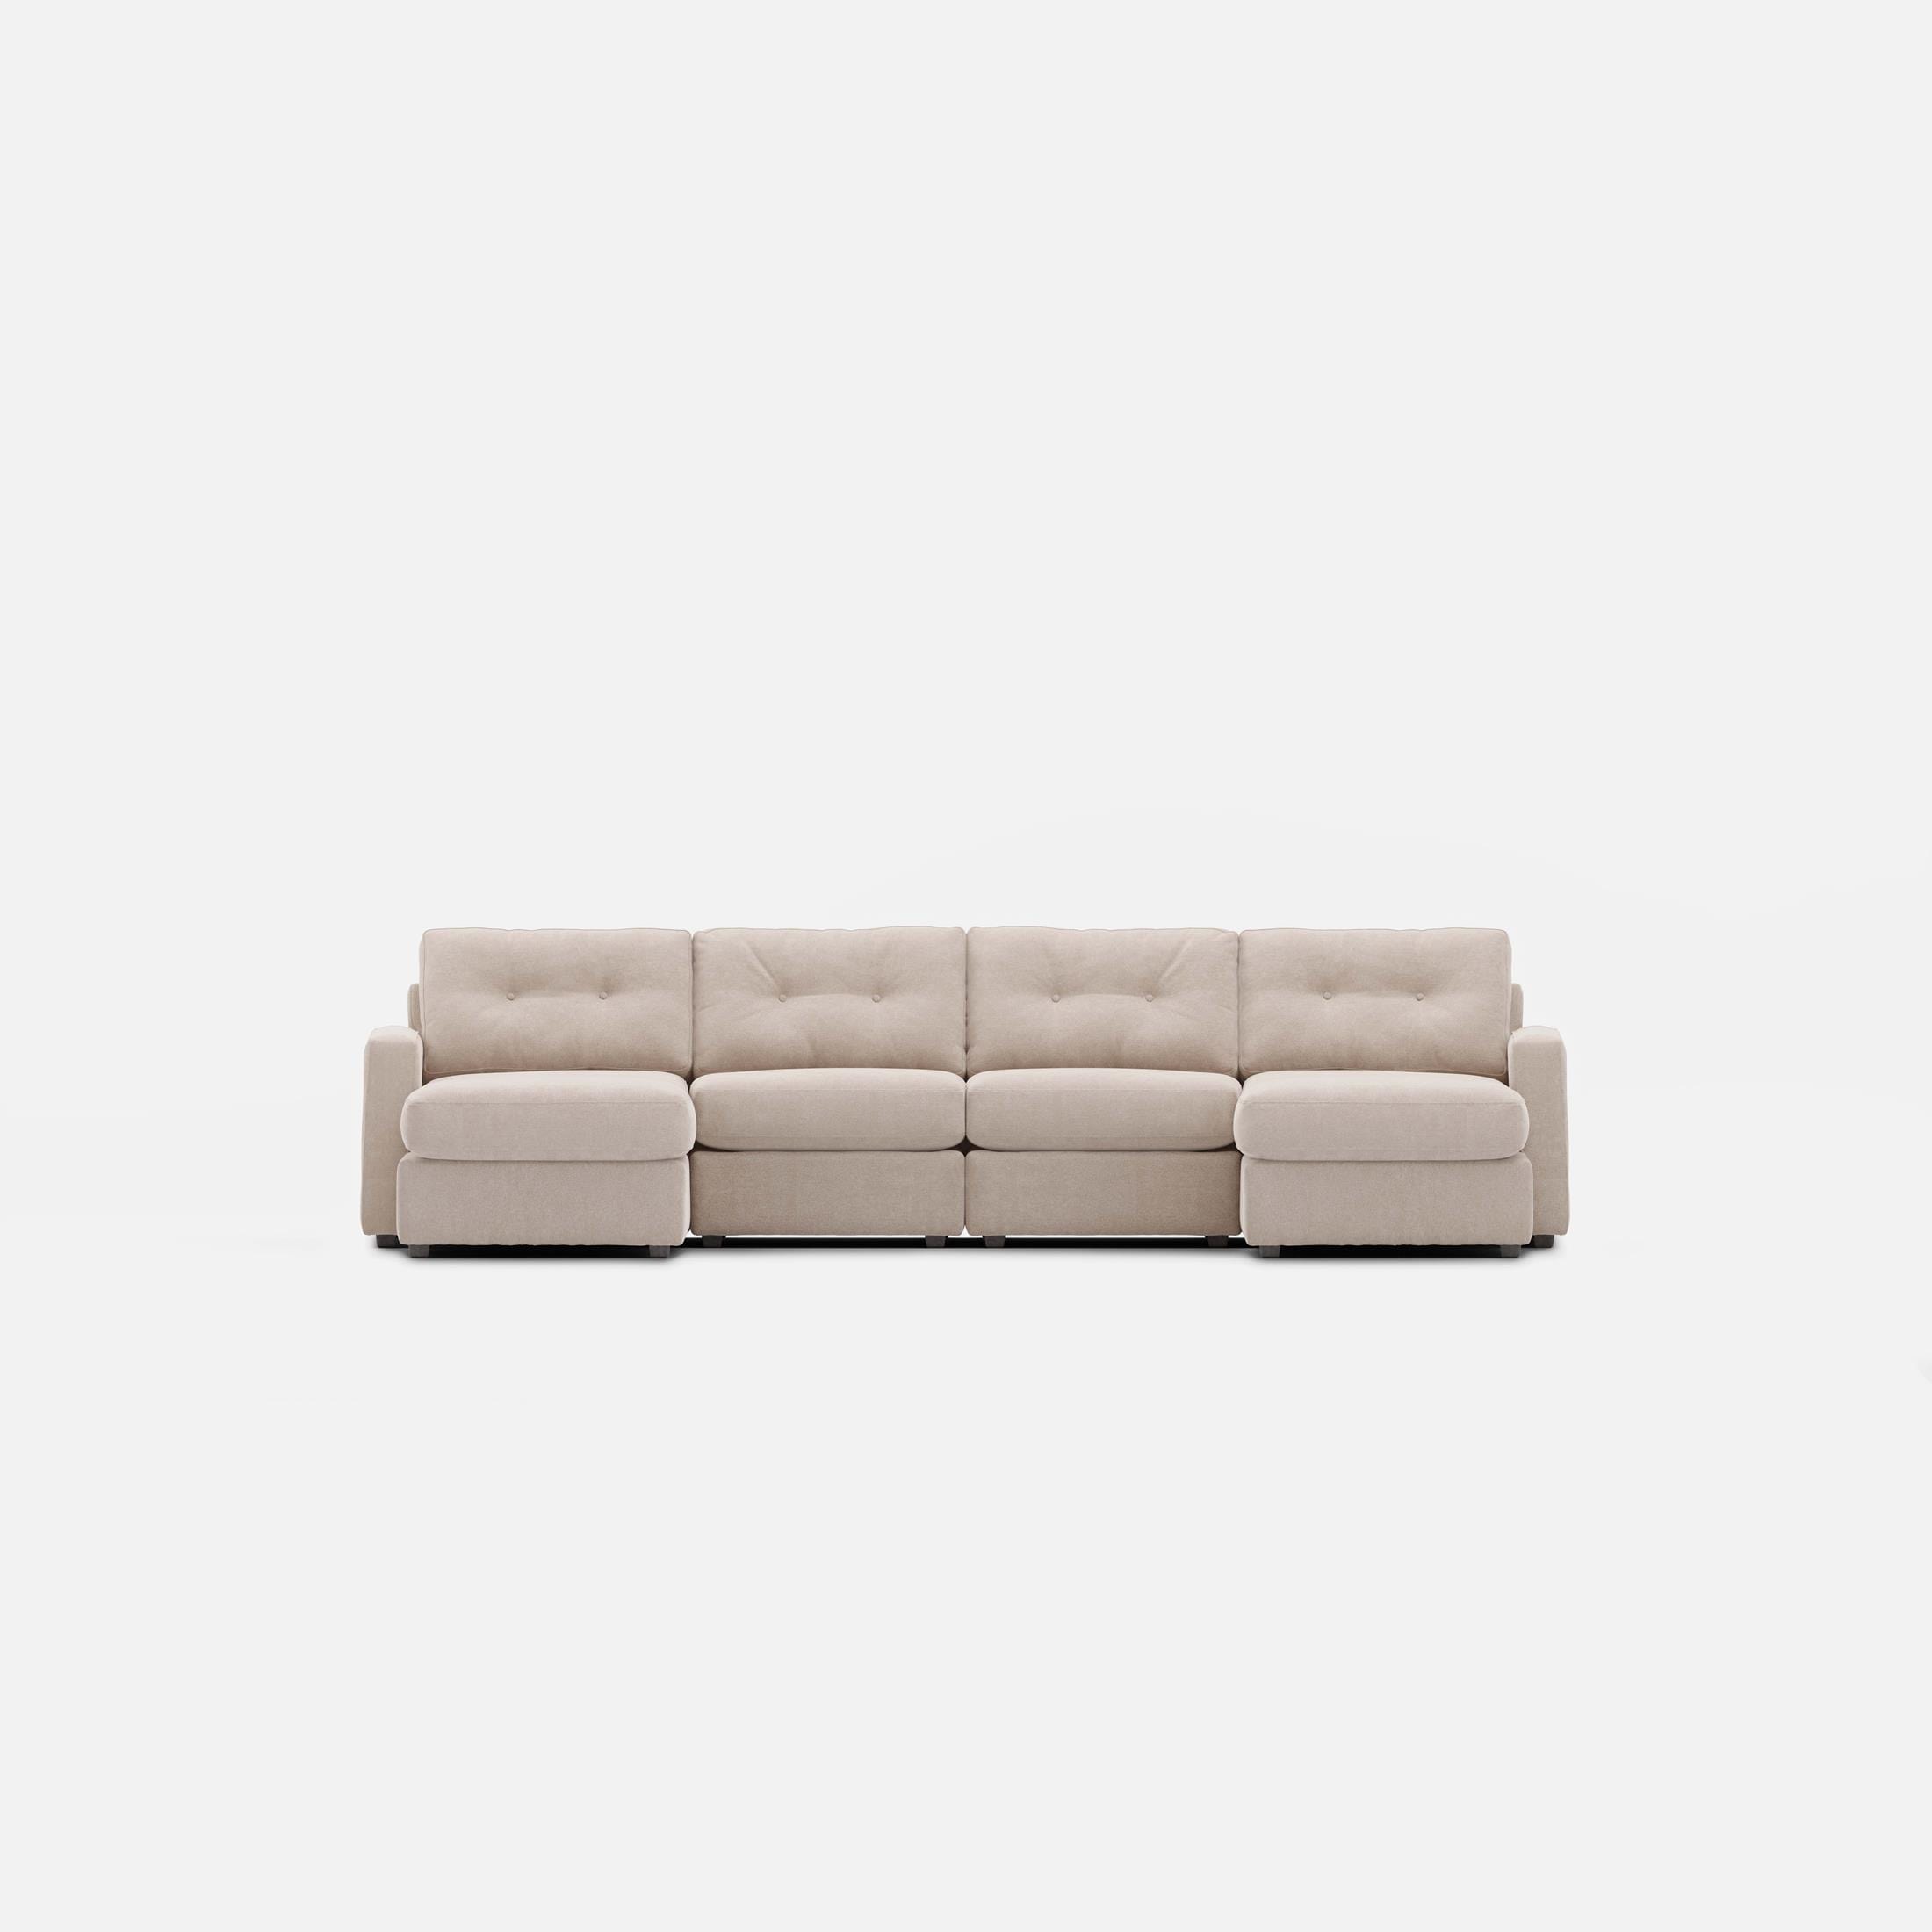 Modular One 4-Piece Sectional with Dual Chaise - Stone